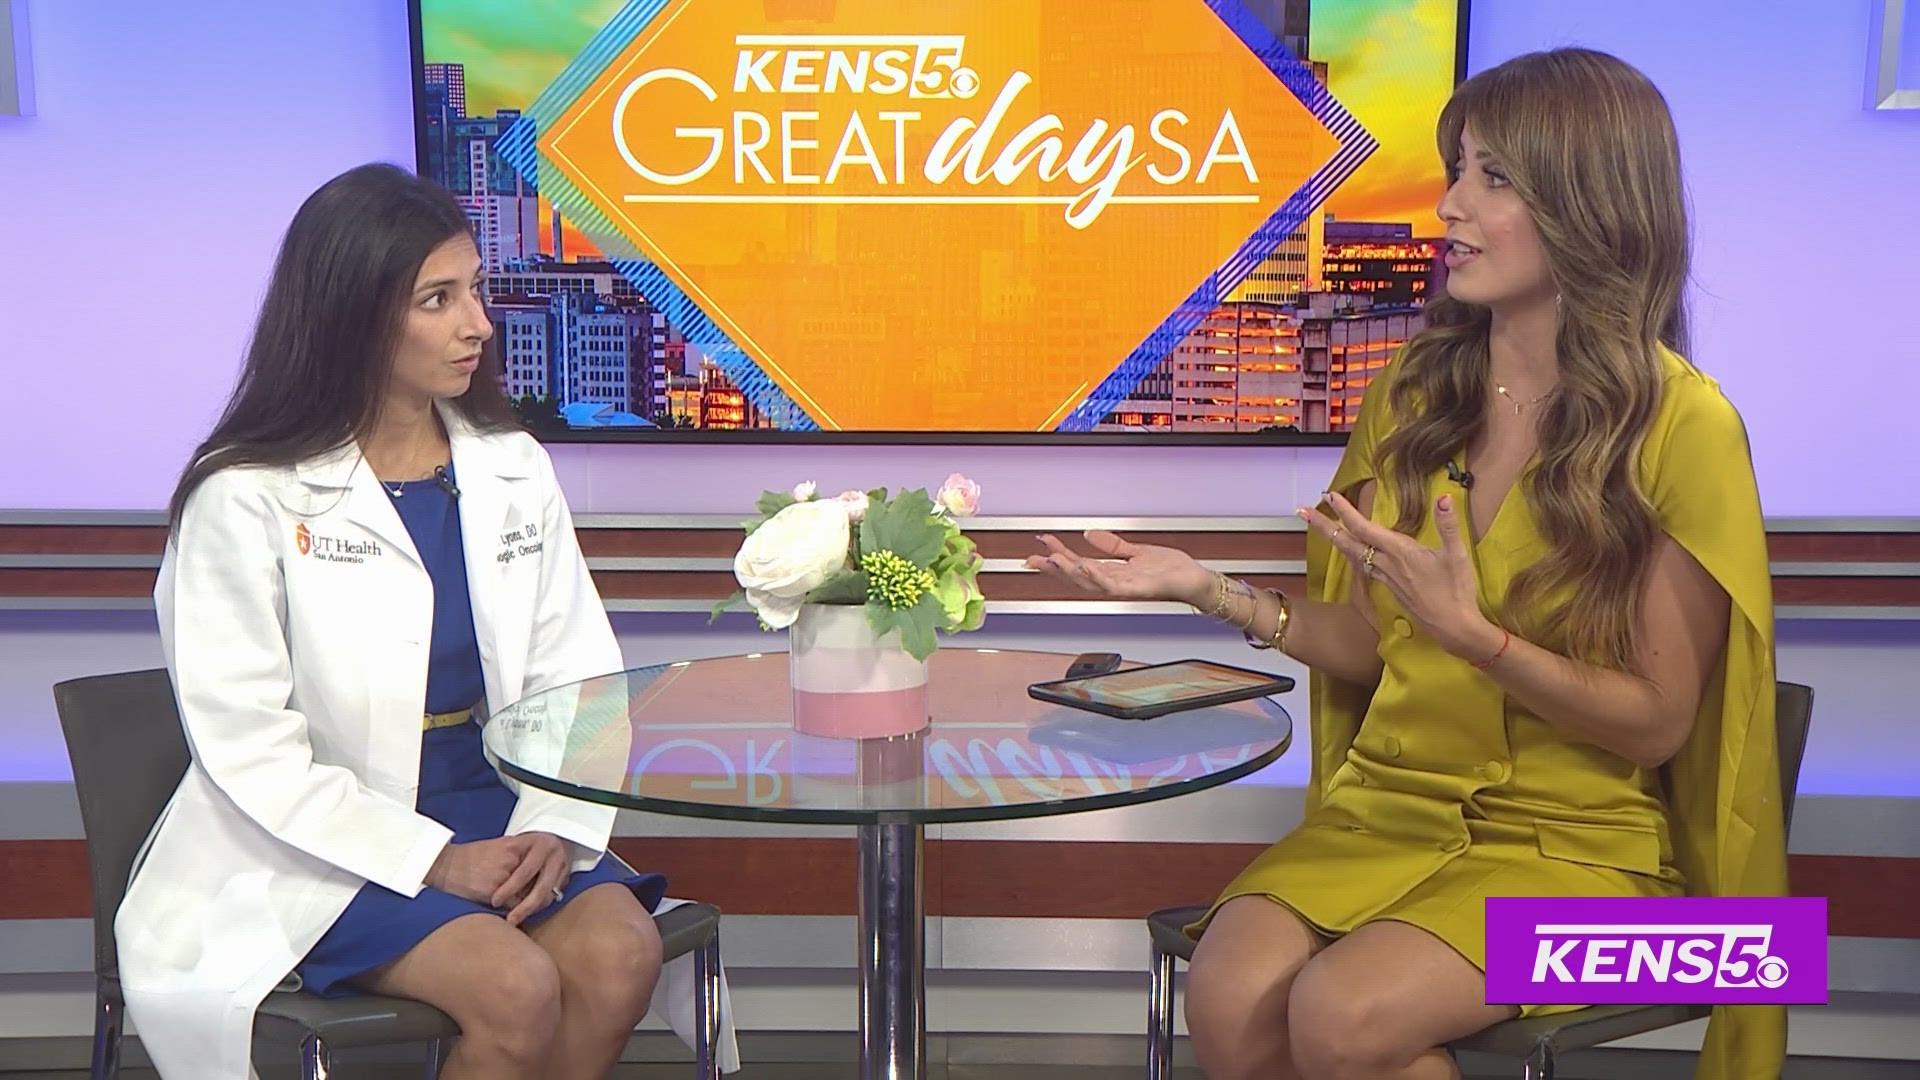 Gynecologic Oncologist Dr. Yasmin Lyons with UT Health San Antonio discusses how women can become more aware of Ovarian Cancer.